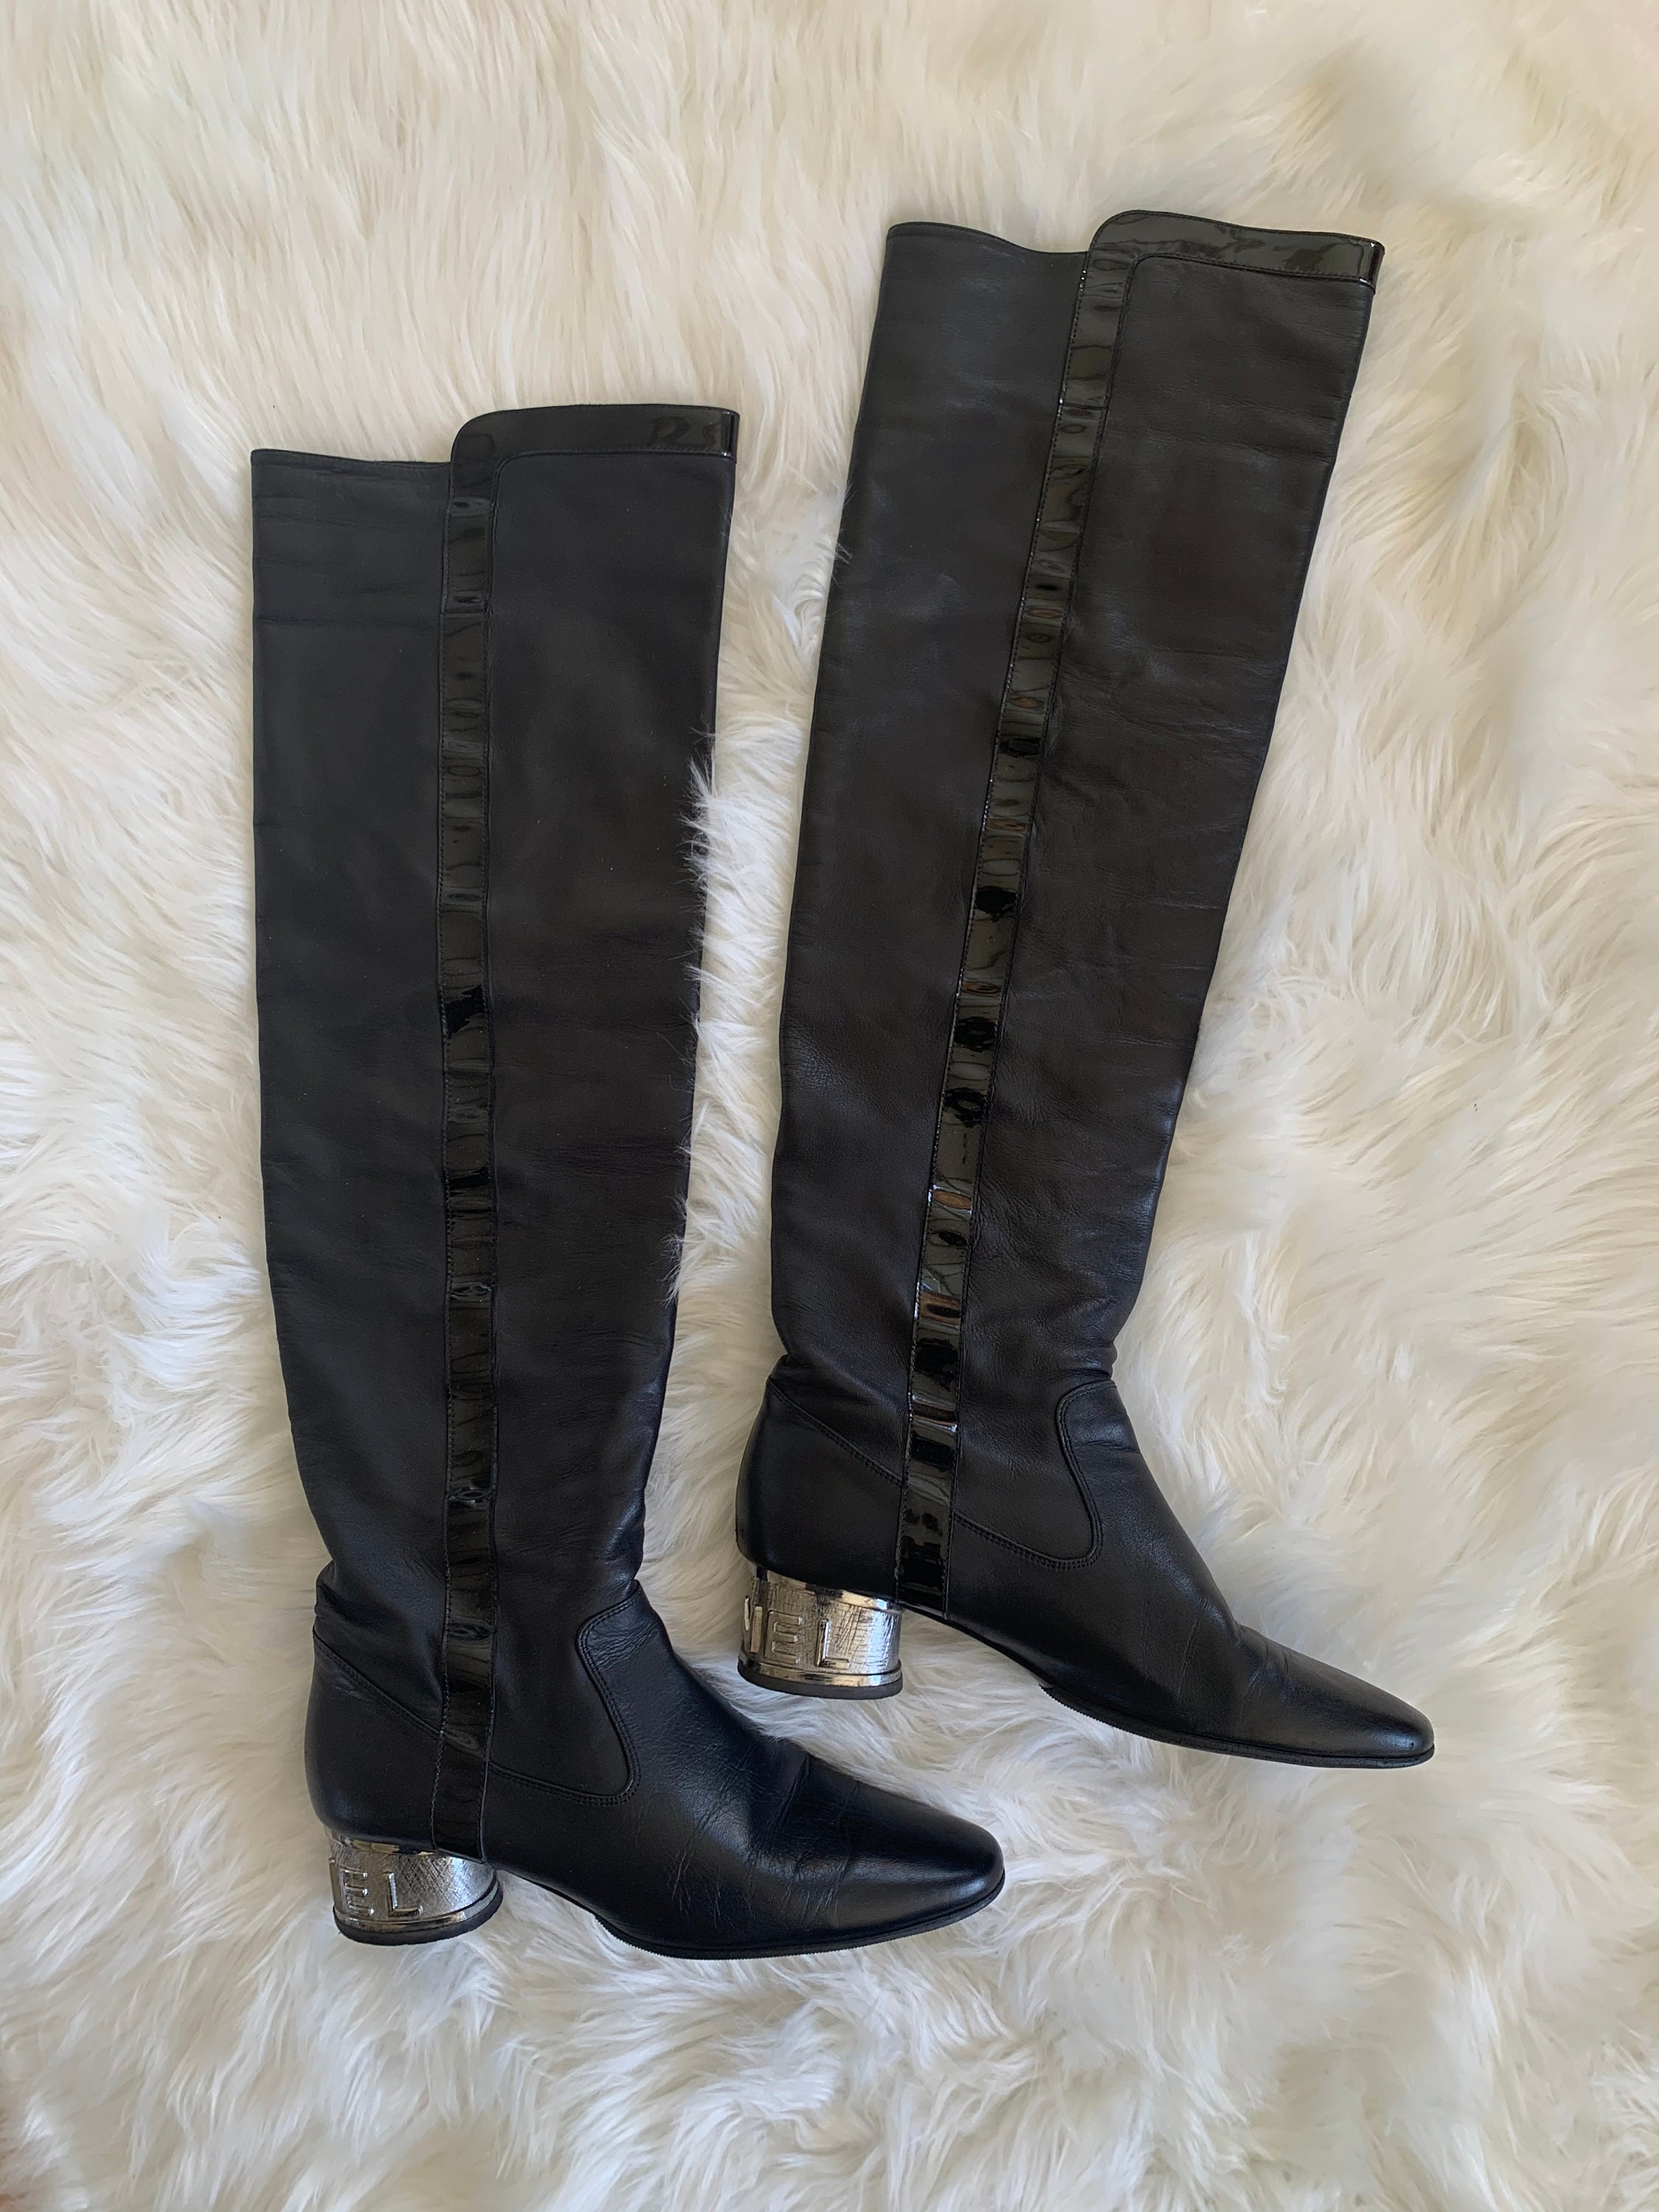 Chanel Knee-High Maryjane Leather Boots | Foxy Couture Carmel